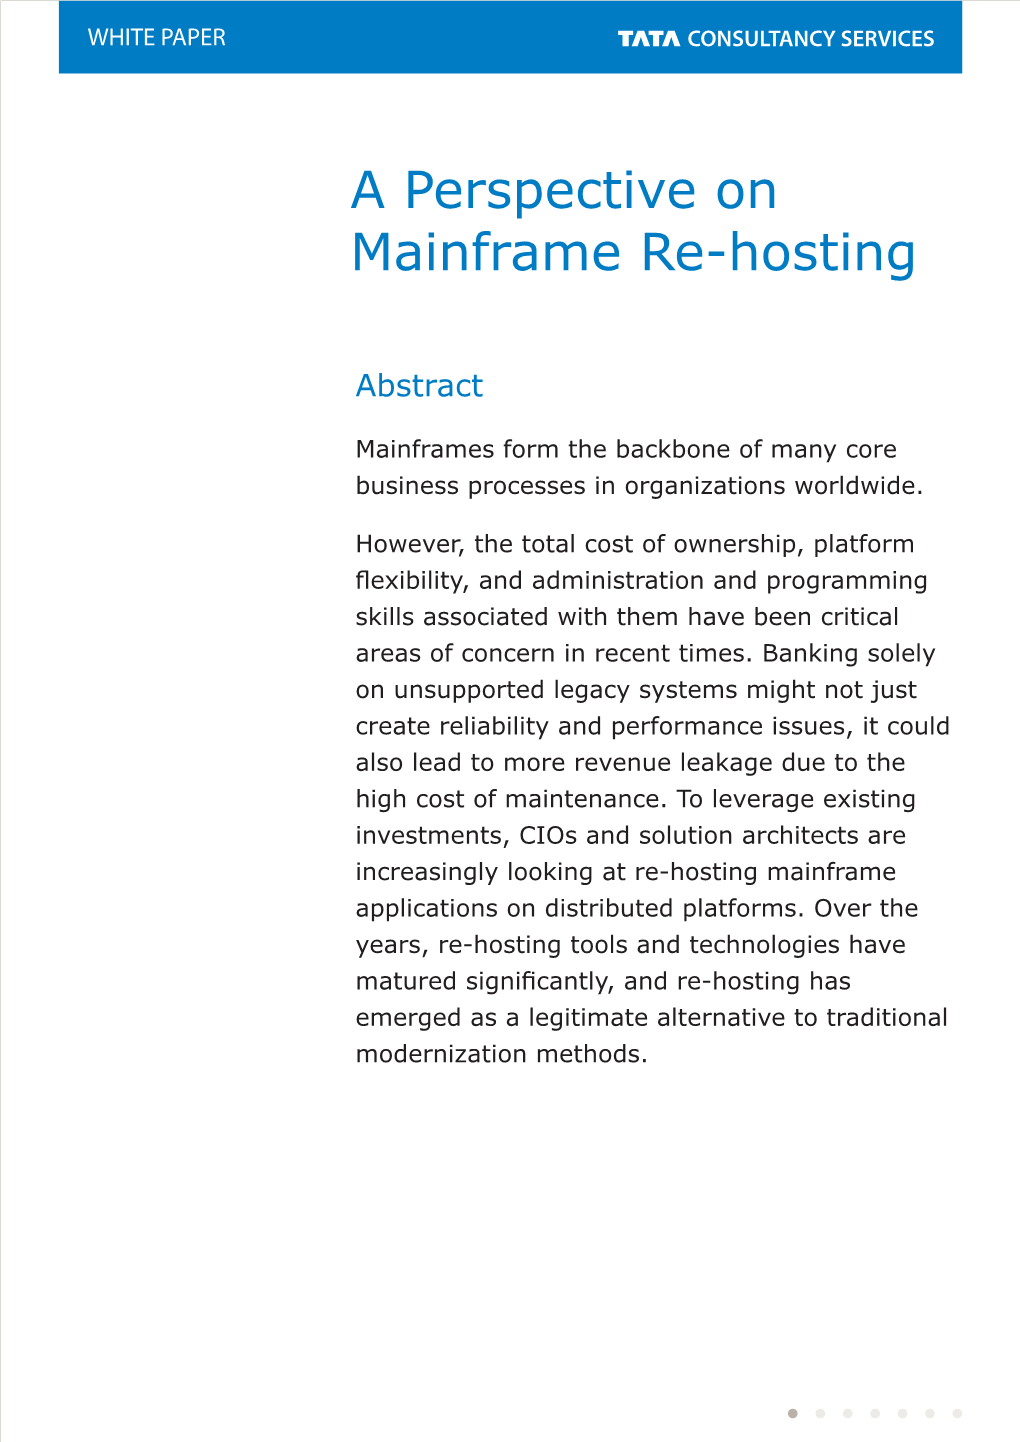 A Perspective on Mainframe Re-Hosting